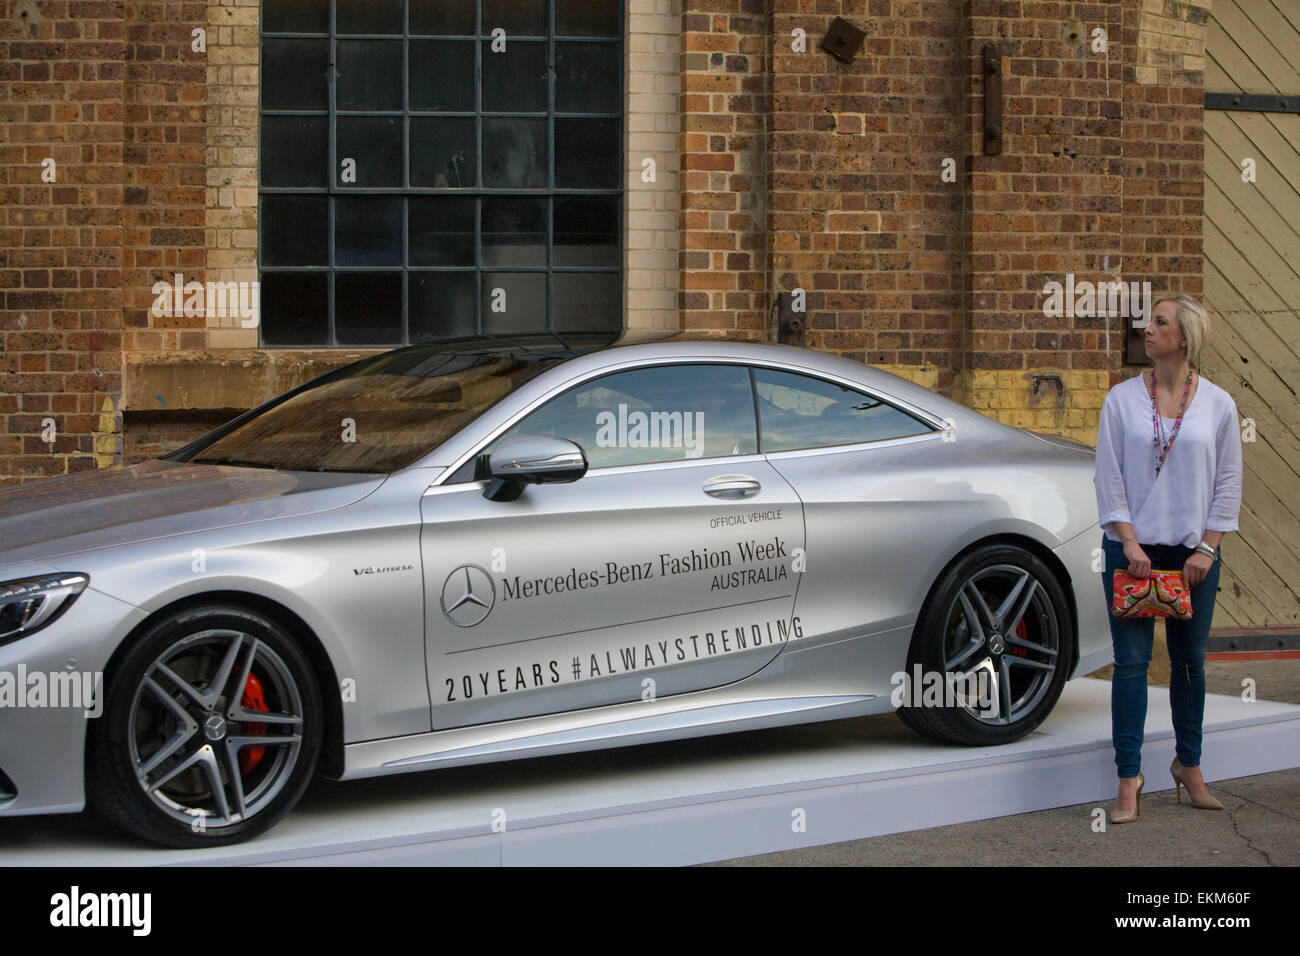 Sydney, Australia. 12th April, 2015. Mercedes benz fashion week australia Exotic cars on display outside the Star Lounge Credit:  martin berry/Alamy Live News Stock Photo